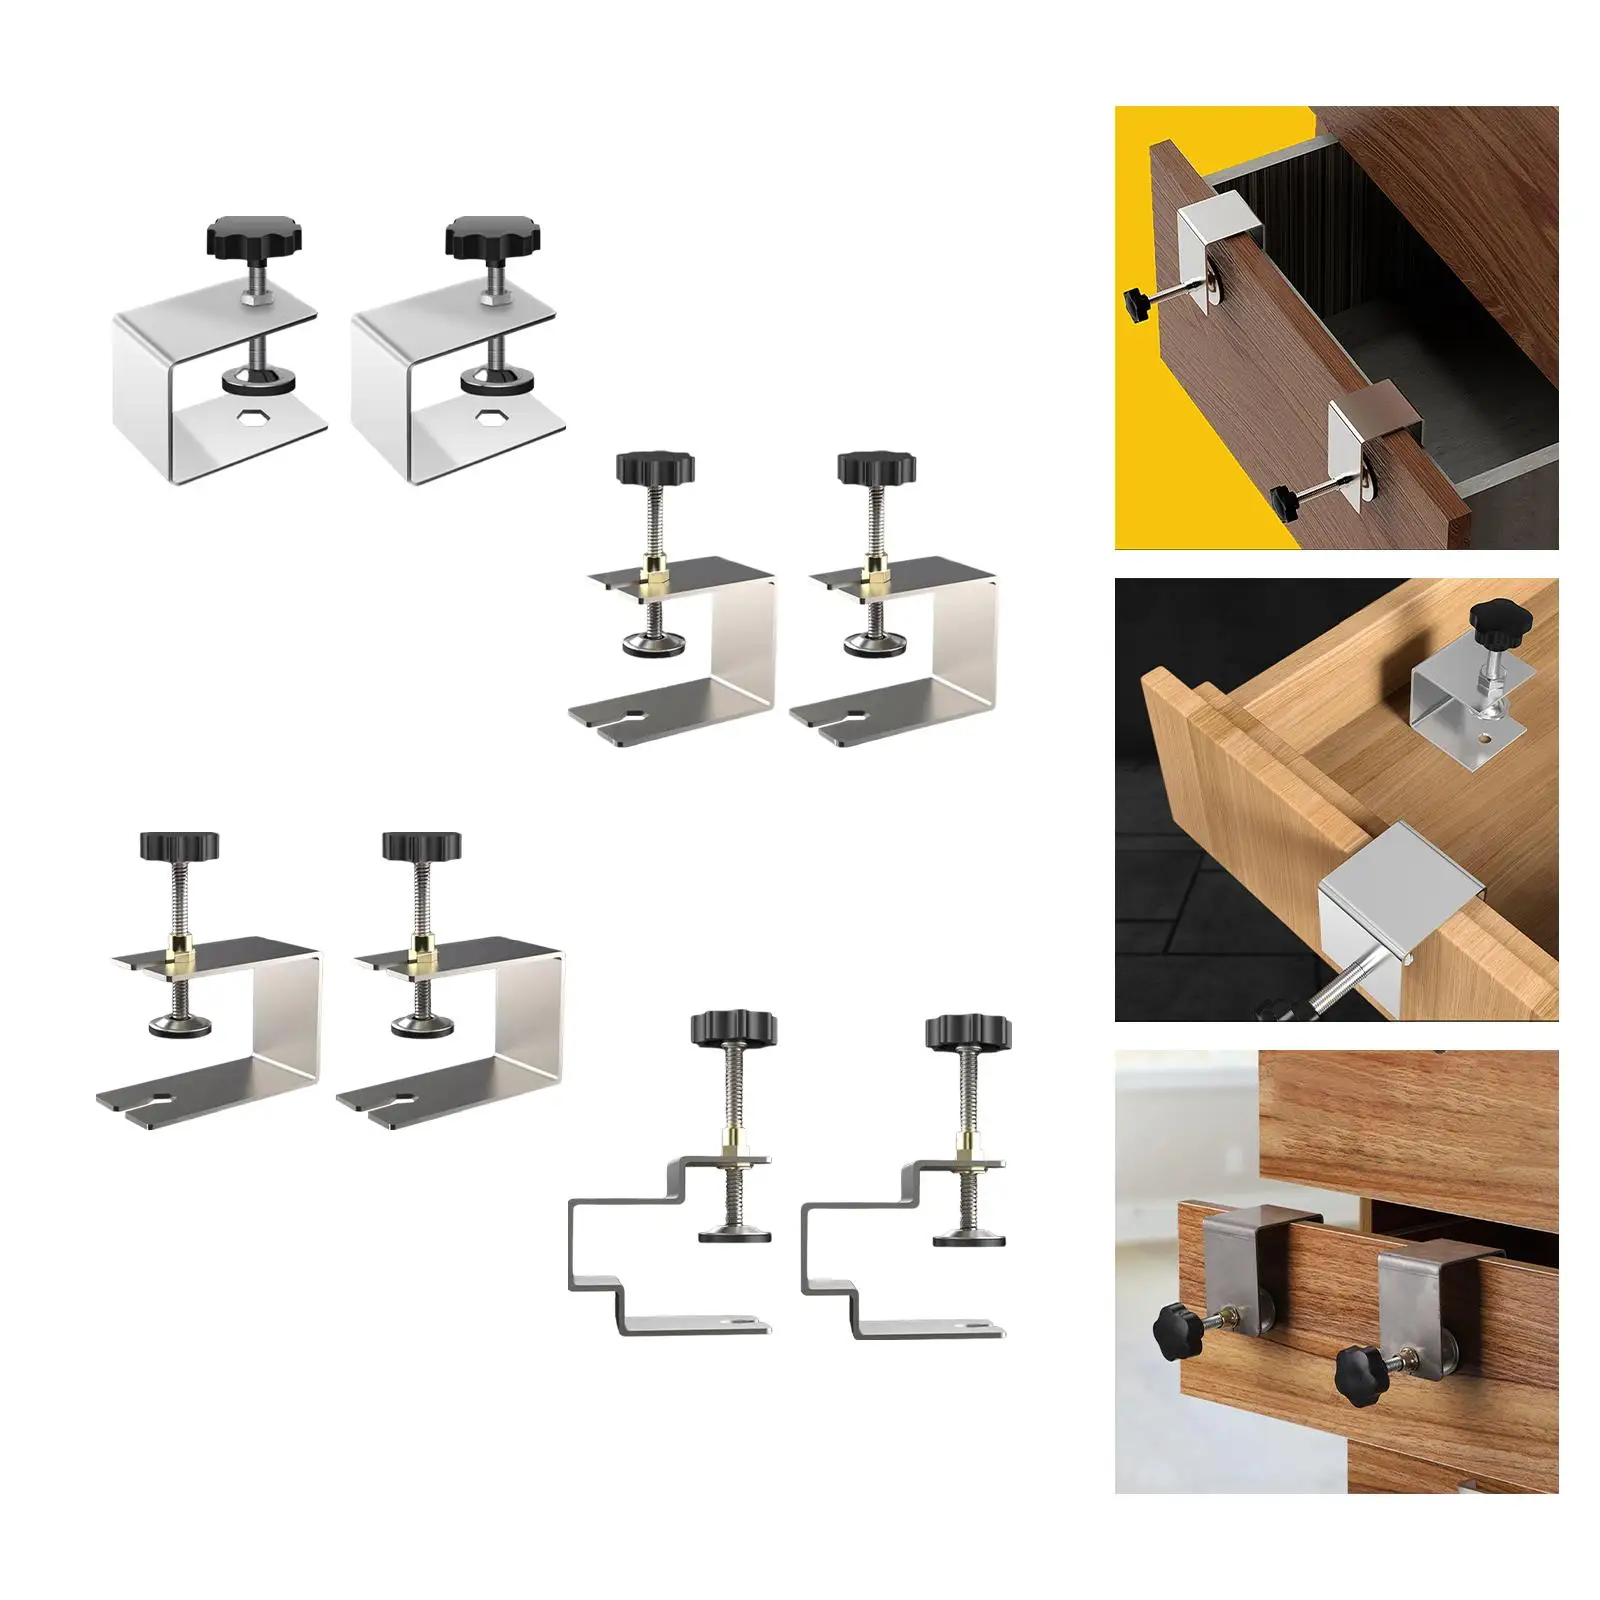 2x Portable Woodworking Clamp Drawer Front Installation Clamps Fixing Clip Adjustment Fasten Stable Smooth Hardware